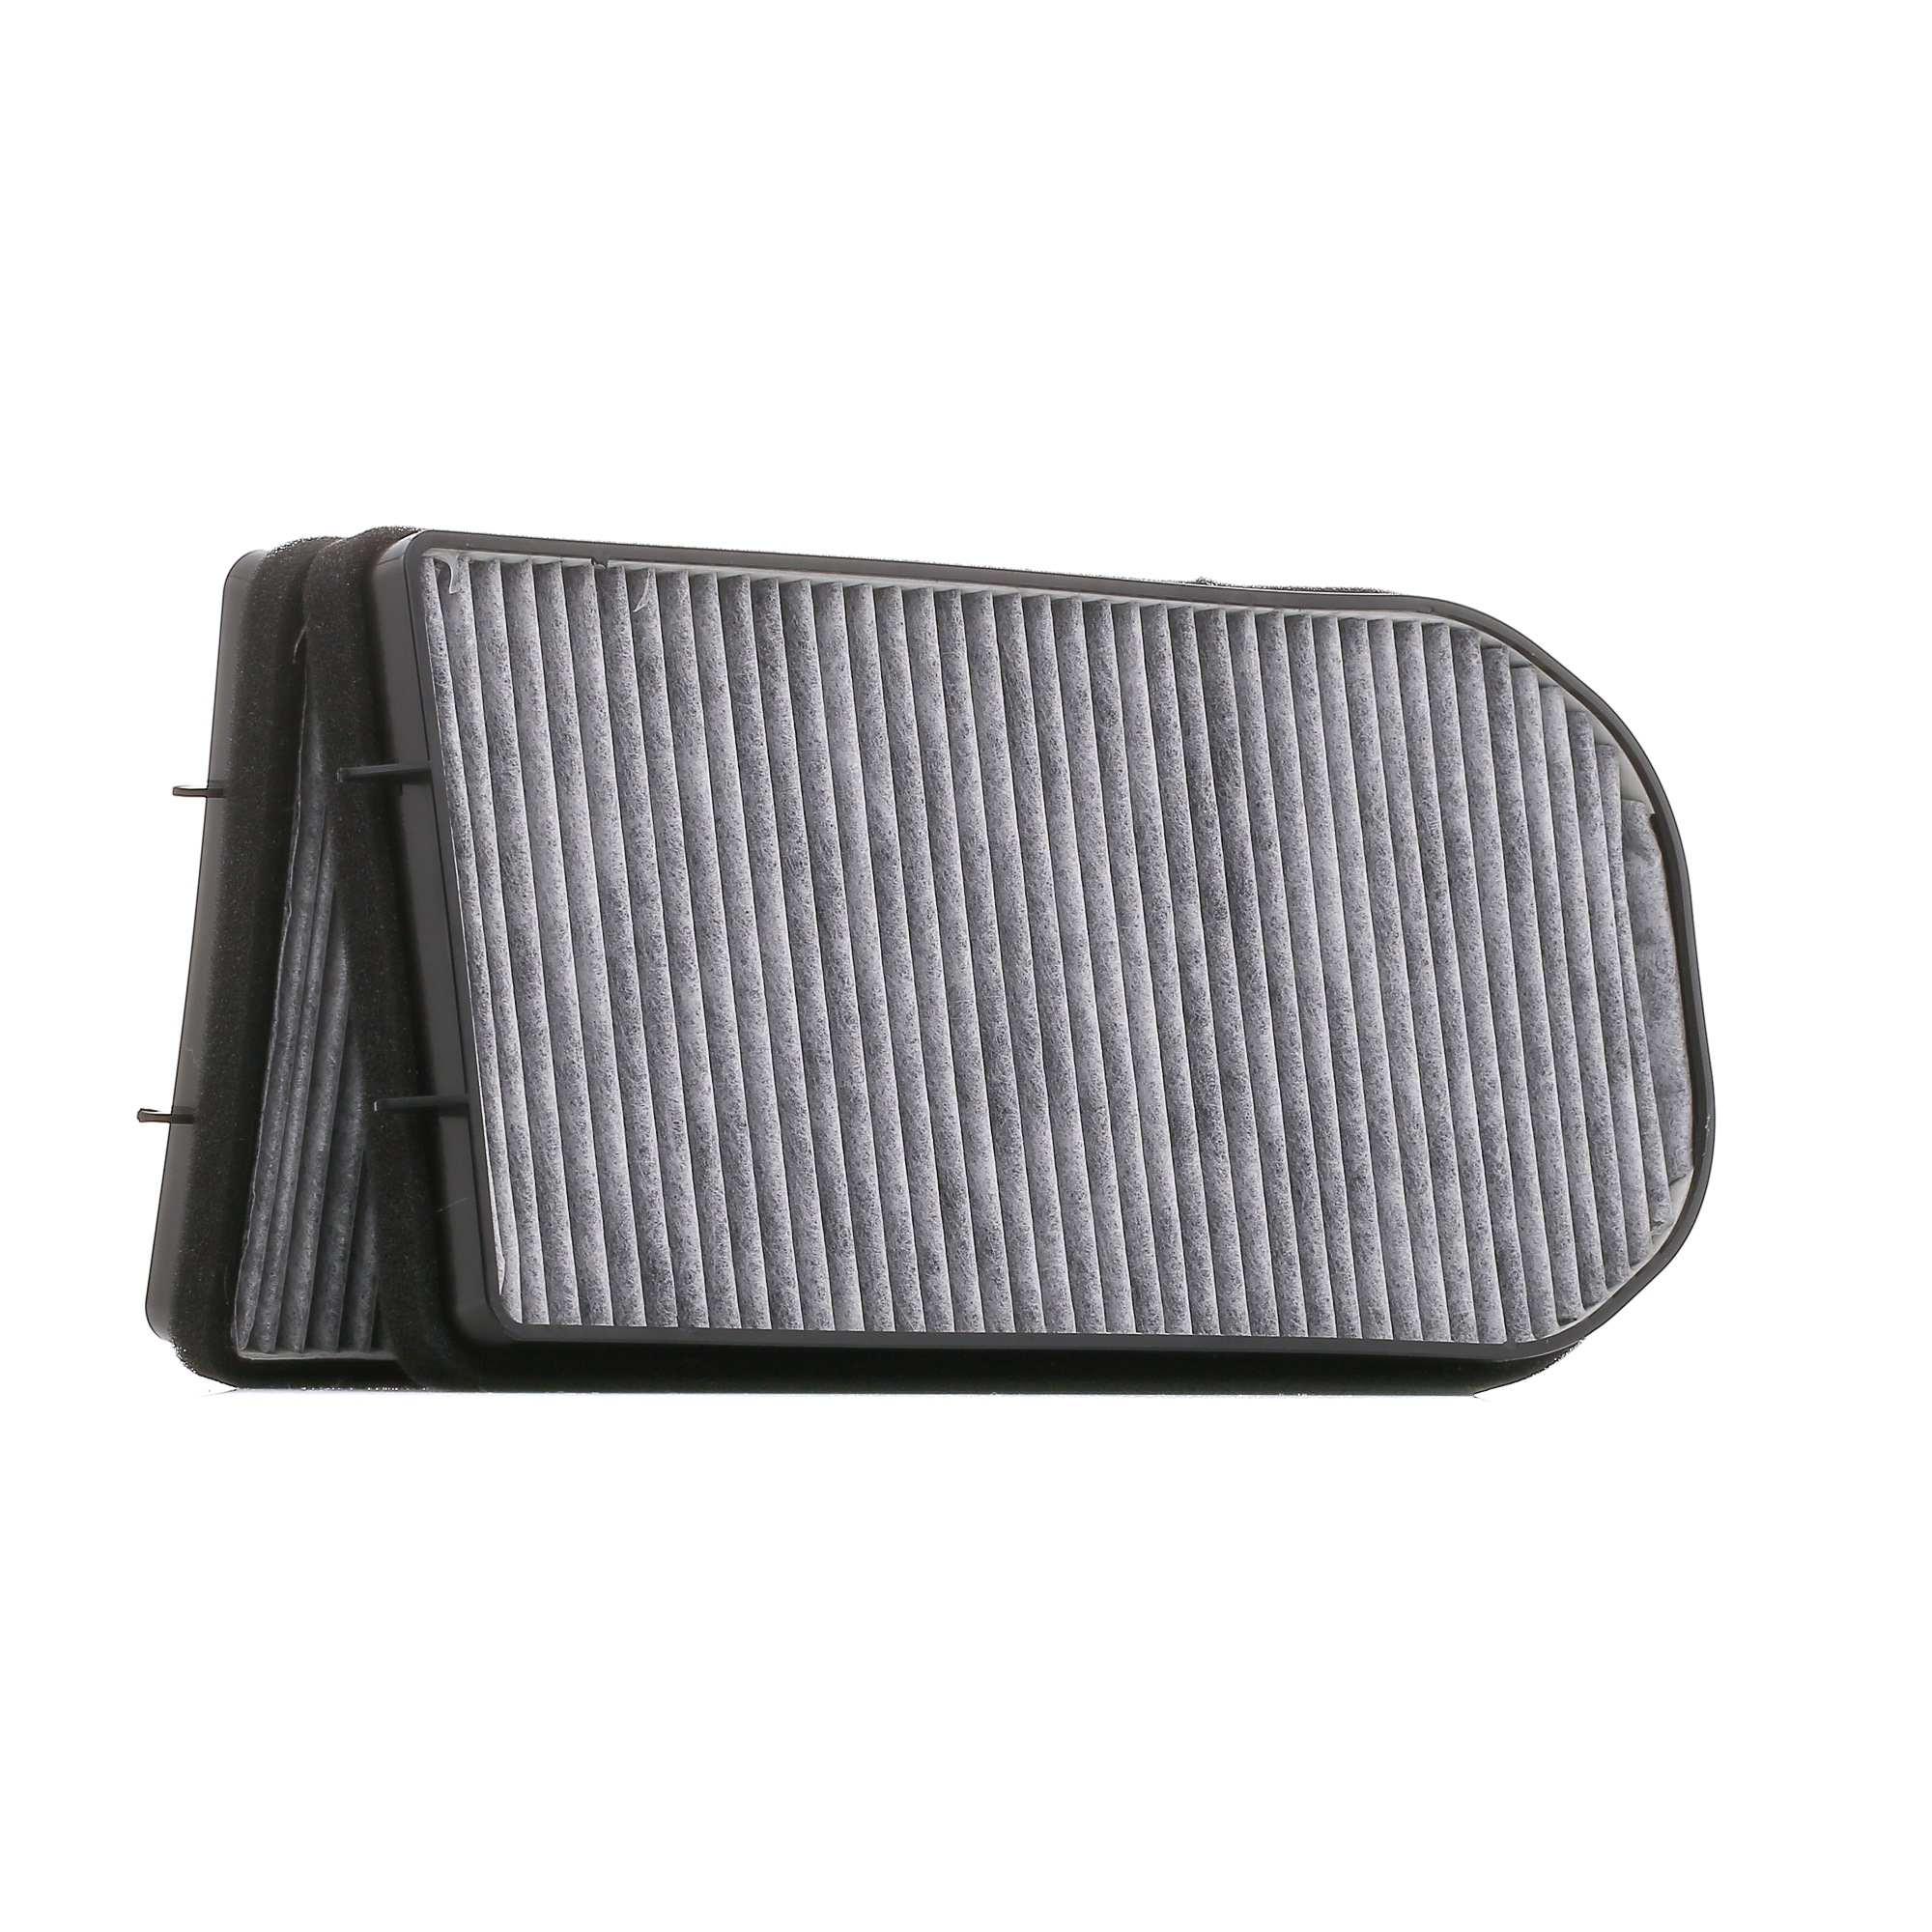 RIDEX Activated Carbon Filter, 362 mm x 181 mm x 30 mm Width: 181mm, Height: 30mm, Length: 362mm Cabin filter 424I0217 buy